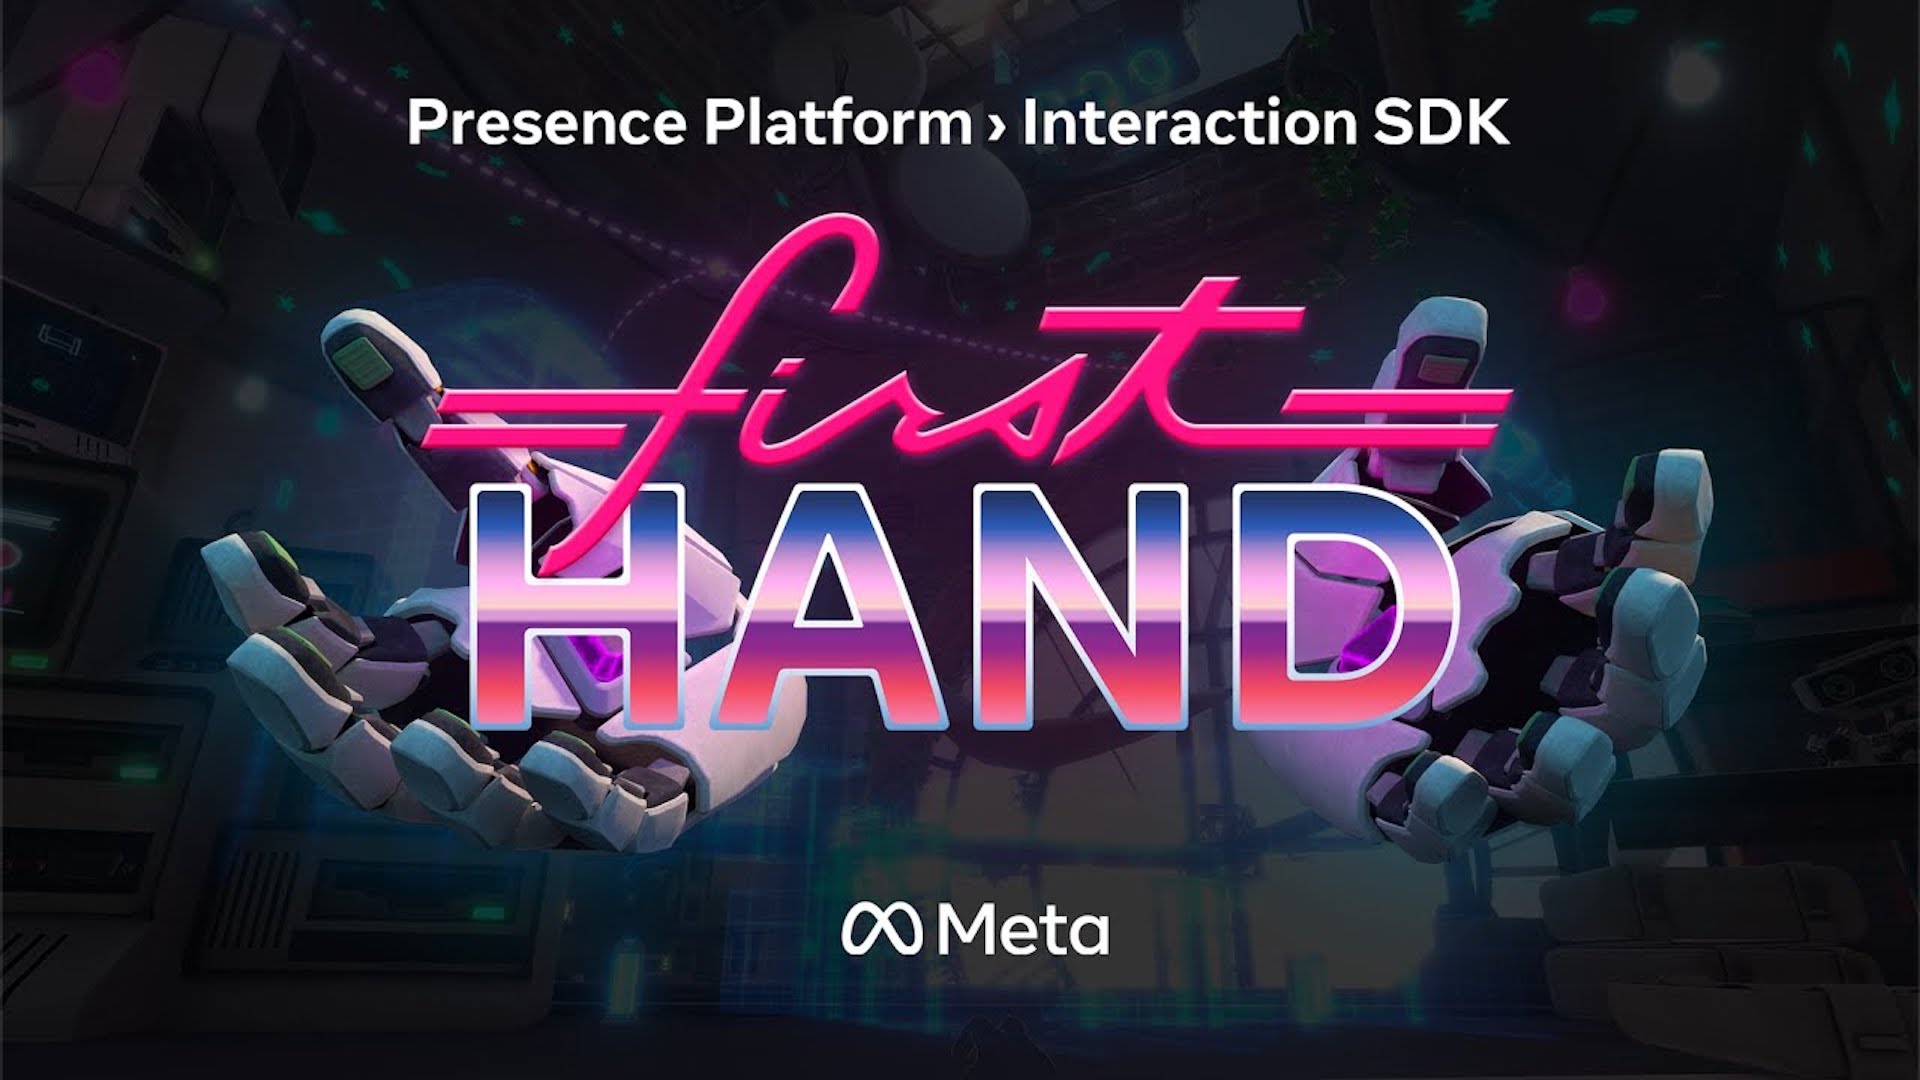 Meta’s new Quest 2 demo shows the magic of hand tracking